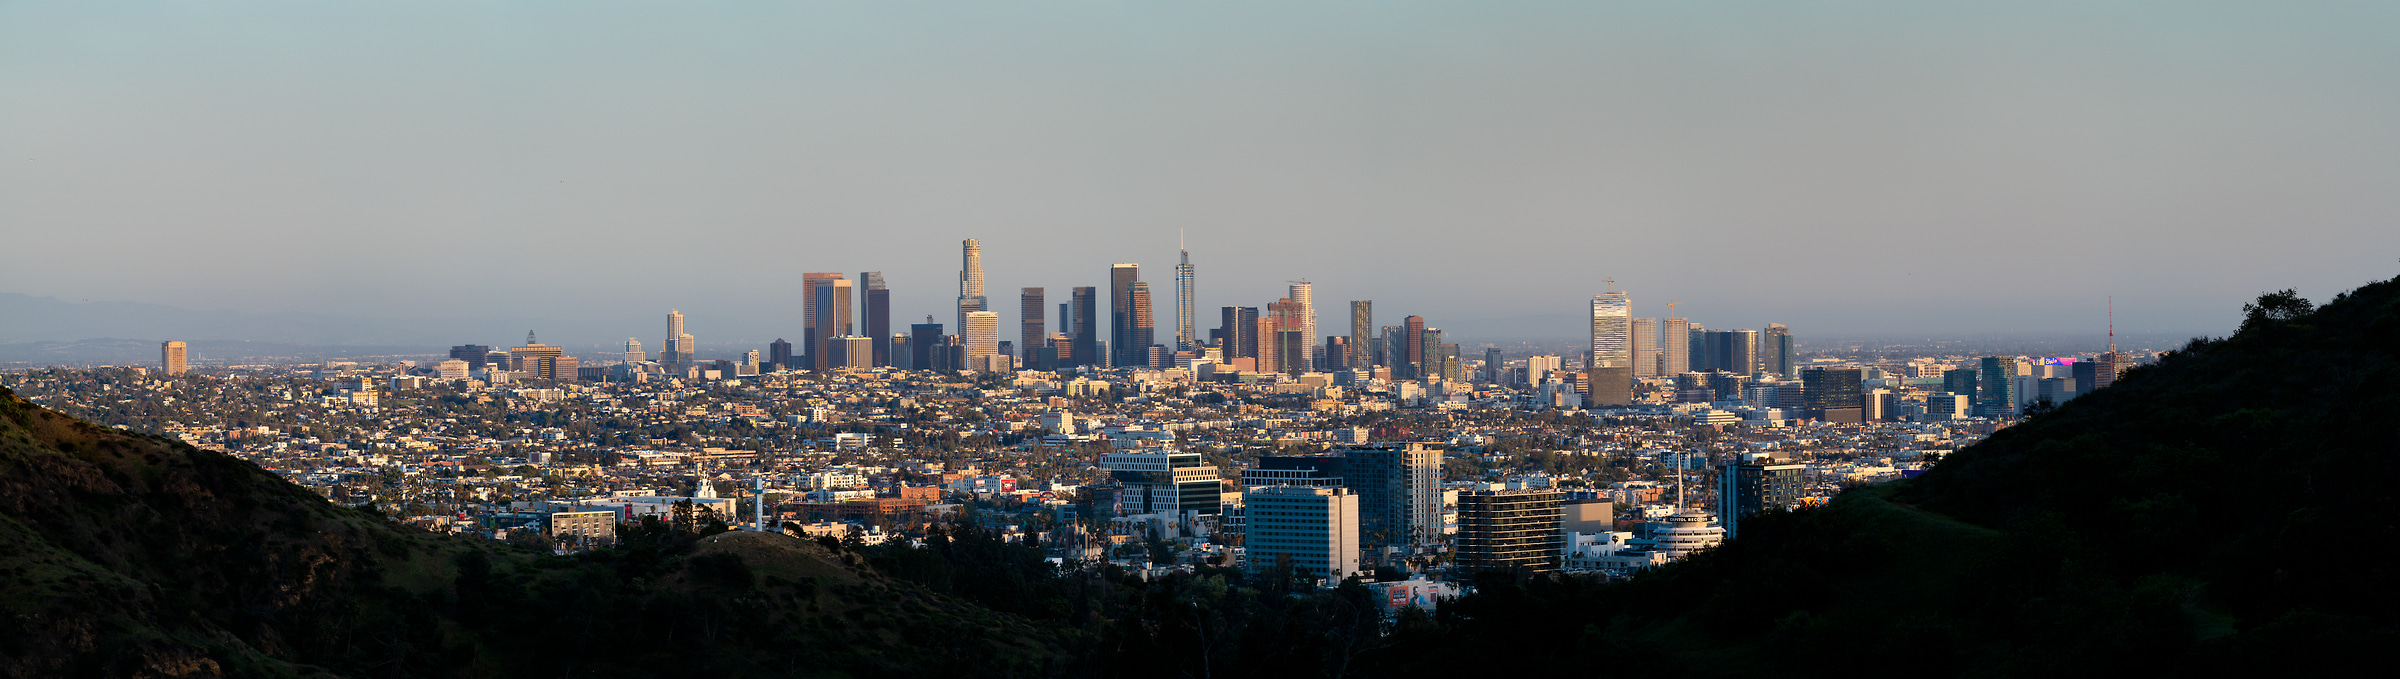 413 megapixels! A very high resolution, large-format panorama photo print of the Downtown Los Angeles skyline at sunset; cityscape photograph created by Greg Probst in Los Angeles, California.